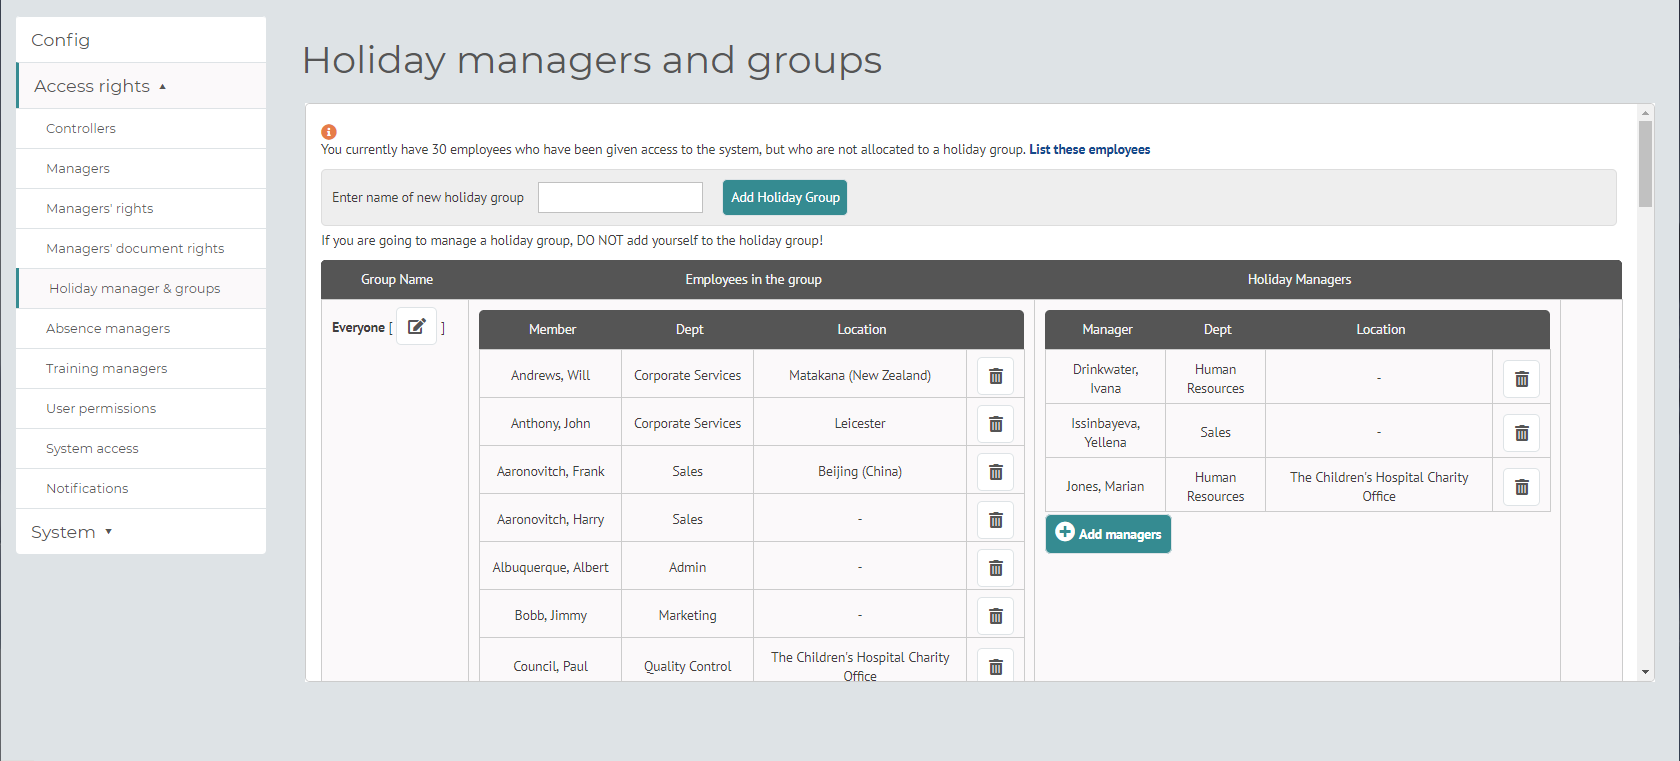 myhrtoolkit config holiday managers and groups